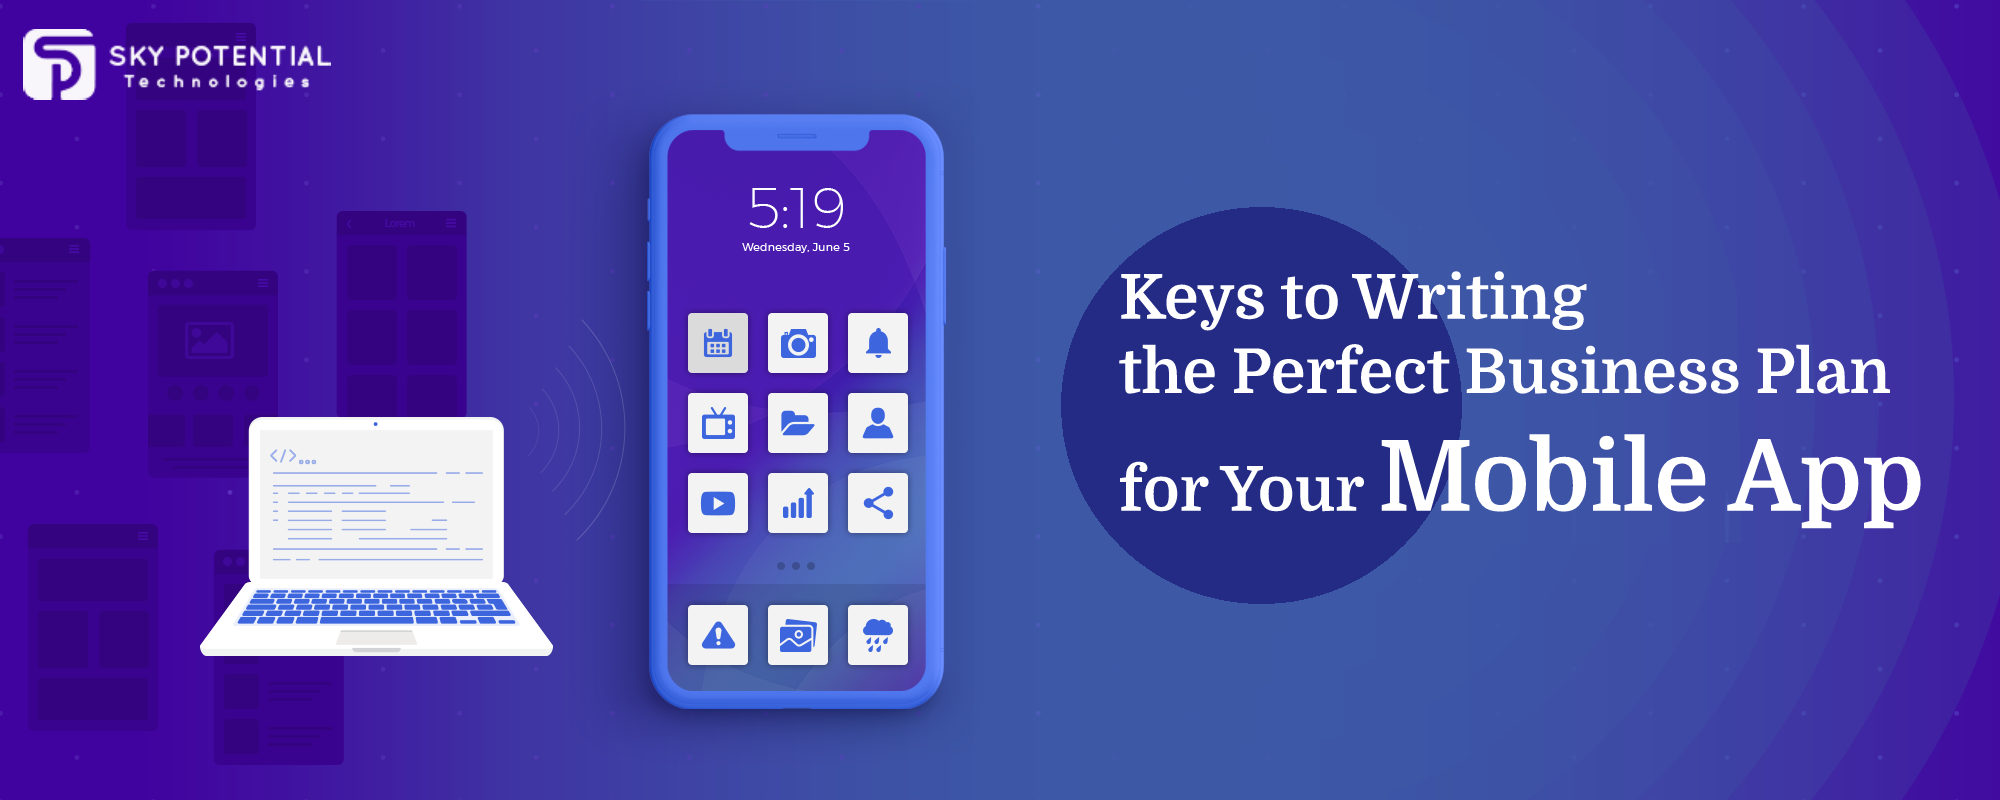 Key to Writing the Perfect Business Plan for Your Mobile App